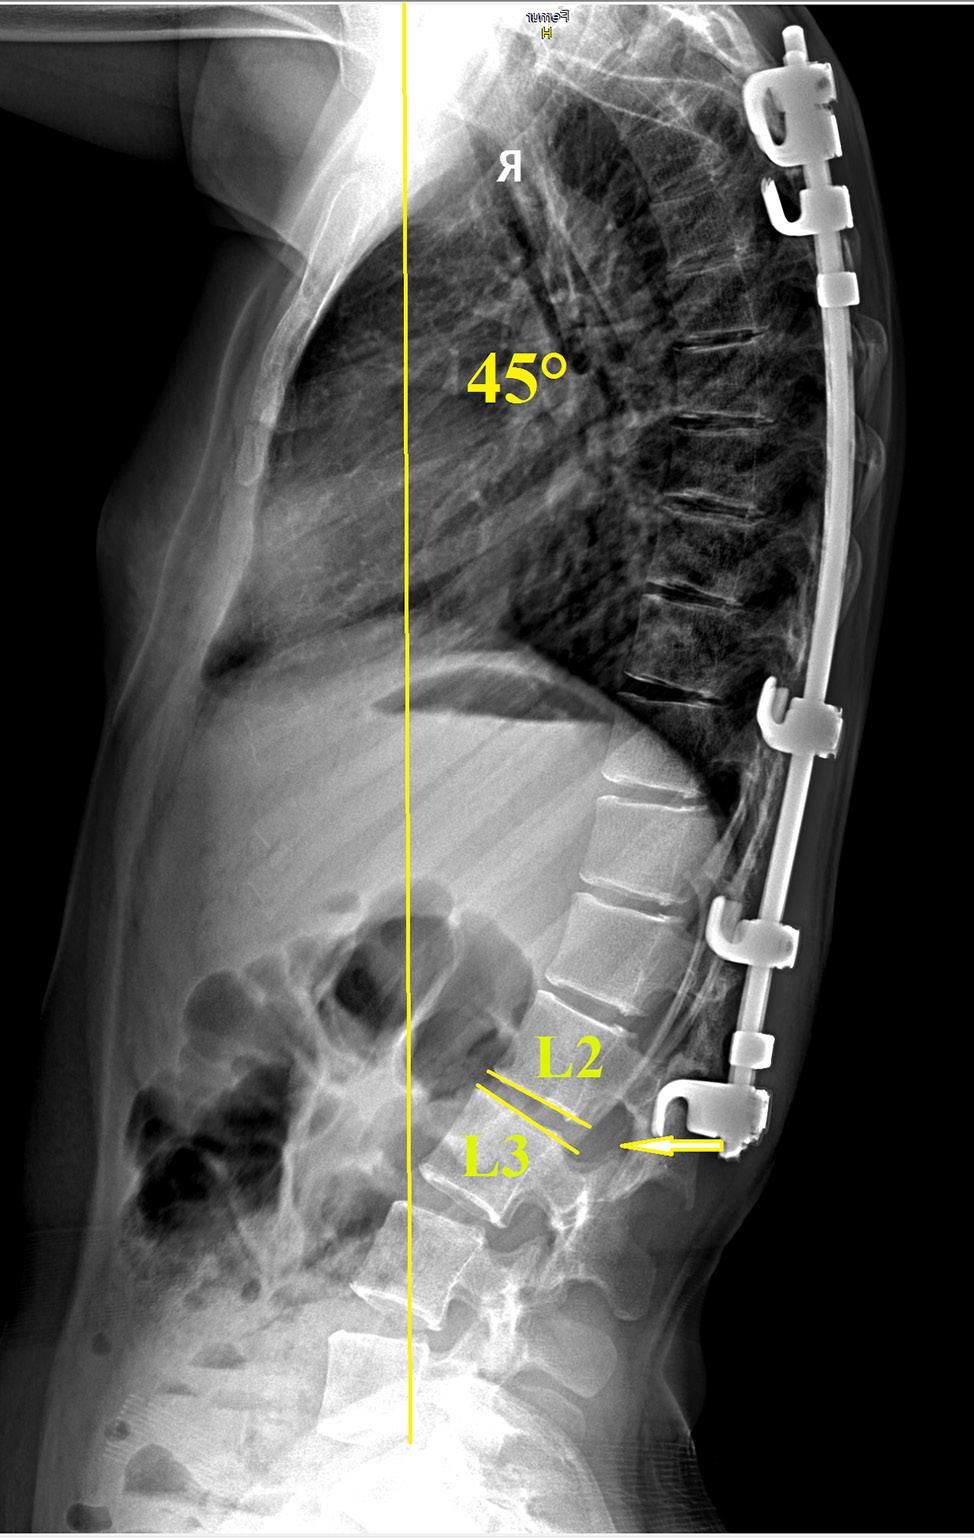 3 detected in 2 cases, requiring remounting of the instrumentation, changing hooks for transpedicular fixation, and extension of the fusion area.